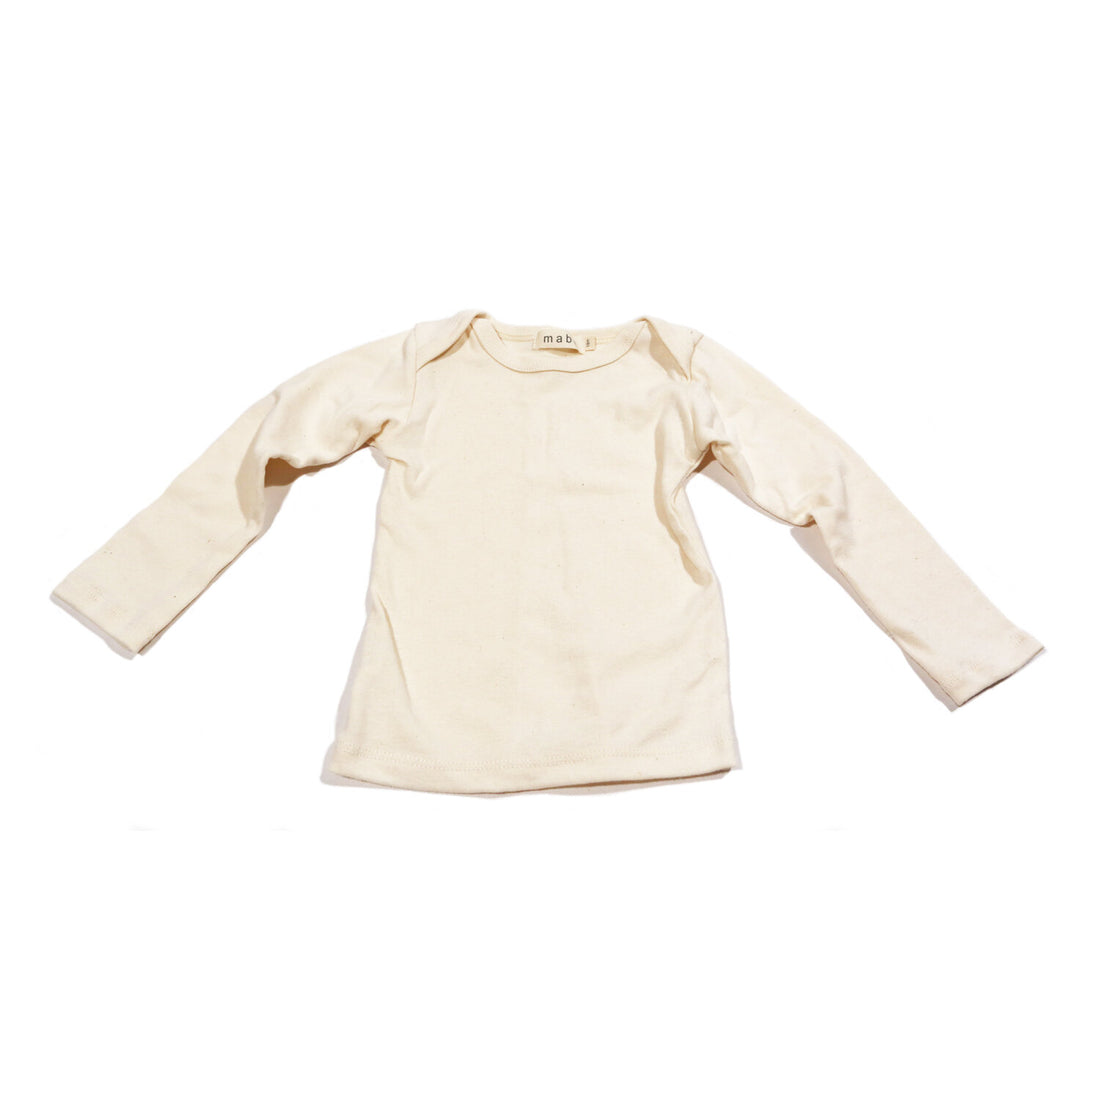 MABO Layette Set in Natural